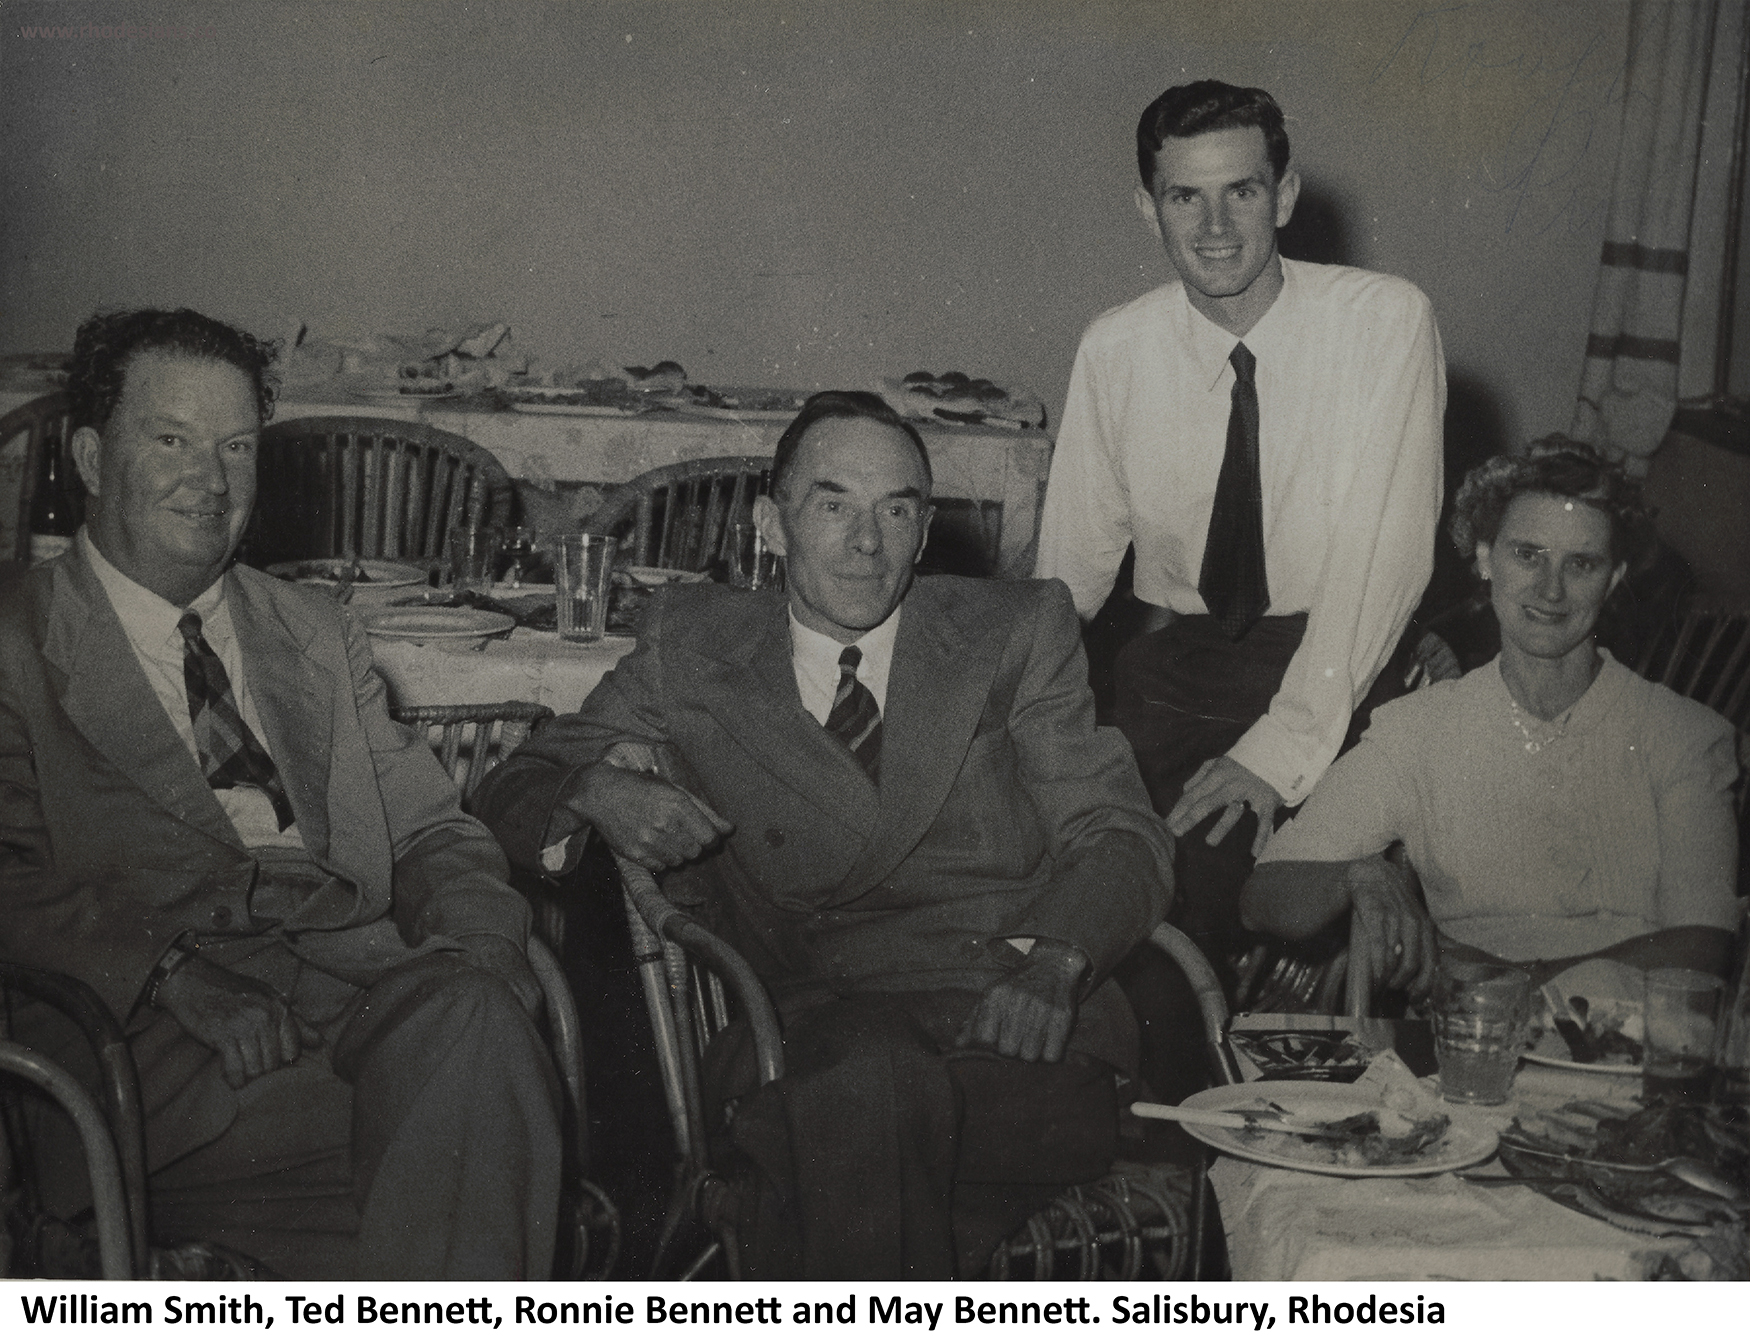 Willie Smith and Ted Bennett of Smith and Bennett with Ronnie and May in Salisbury, Rhodesia